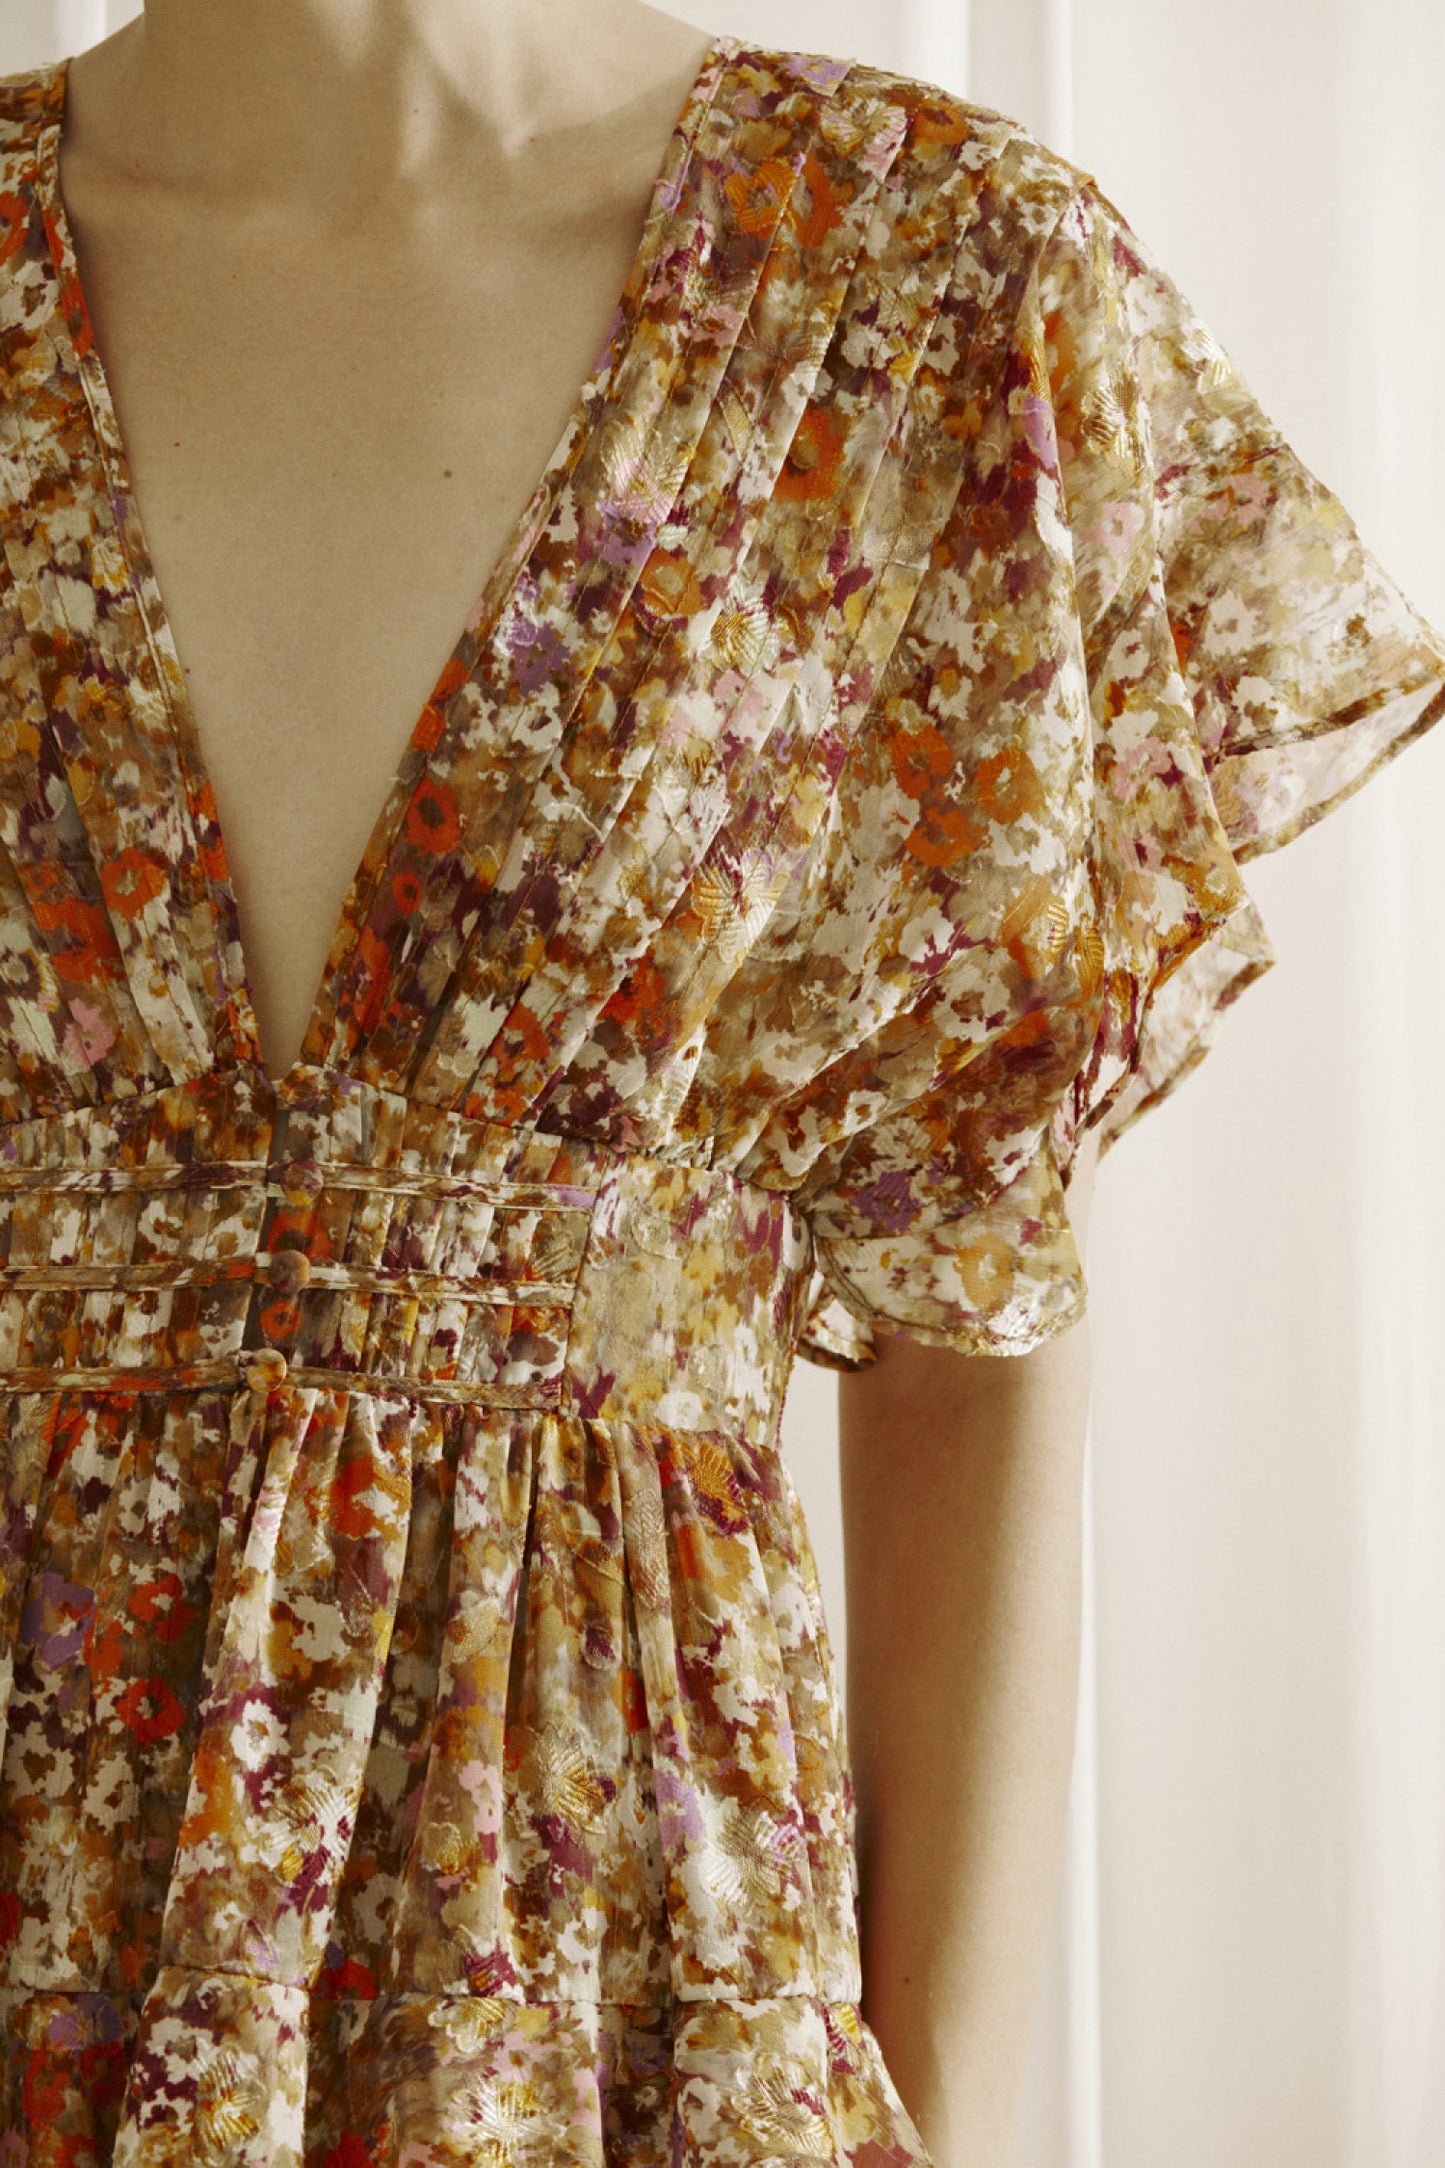 Ditsy floral print midi dress multicolor. Prominent browns, oranges, purples, and maroons.  It shows a deep v-neckline, short fluttered, ruffled sleeves, and a cinched empire waist with center buttons. It also has a ruffled, tiered layered, midi bottom and an open back with a crisscross back tie..  Front close view.